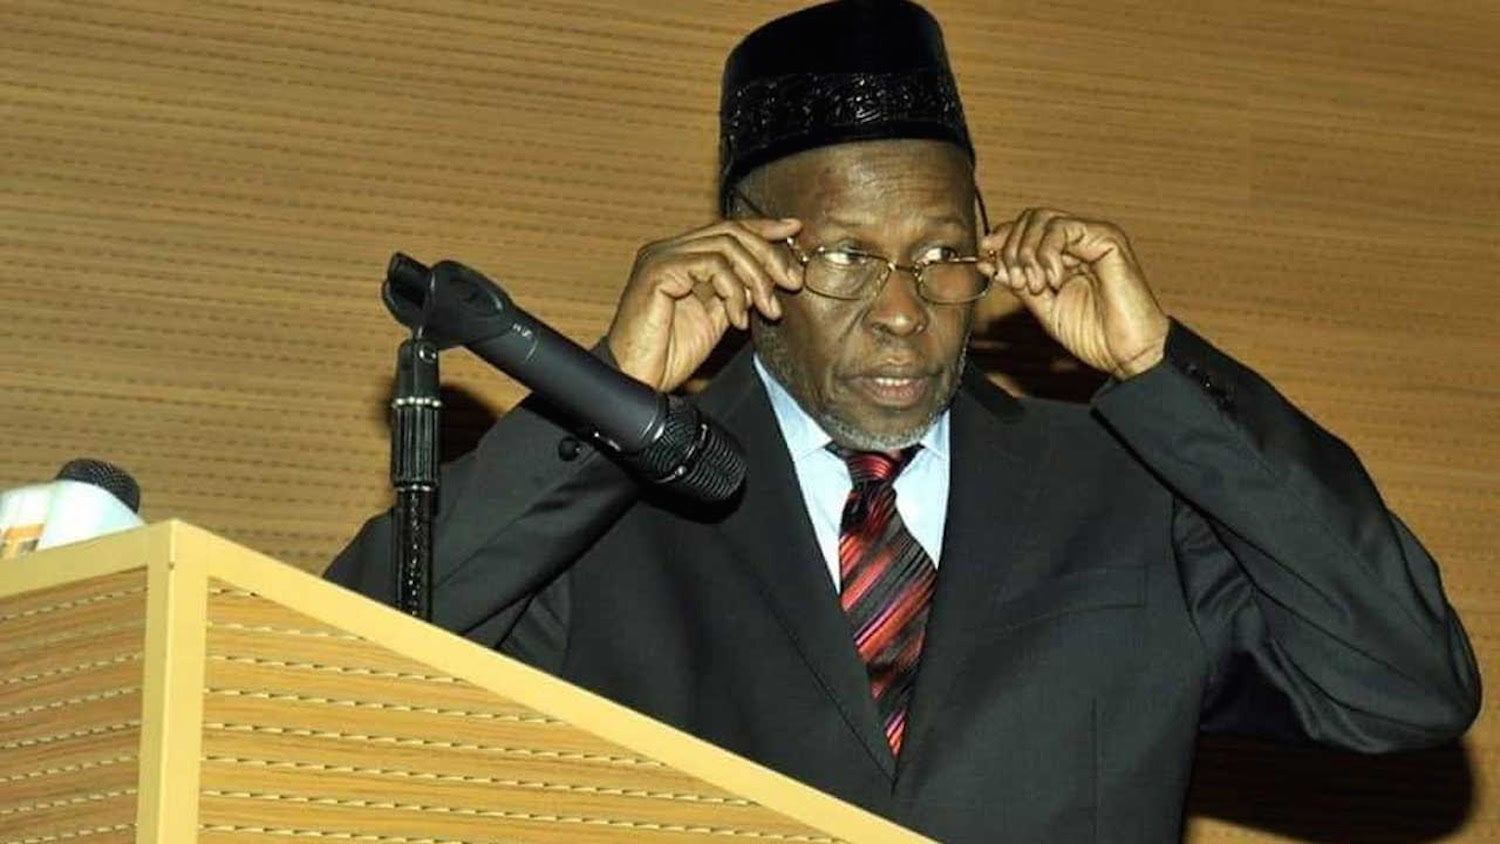 sharia:-cjn’s-call-for-constitution-amendment-threat-to-national-unity-—-can